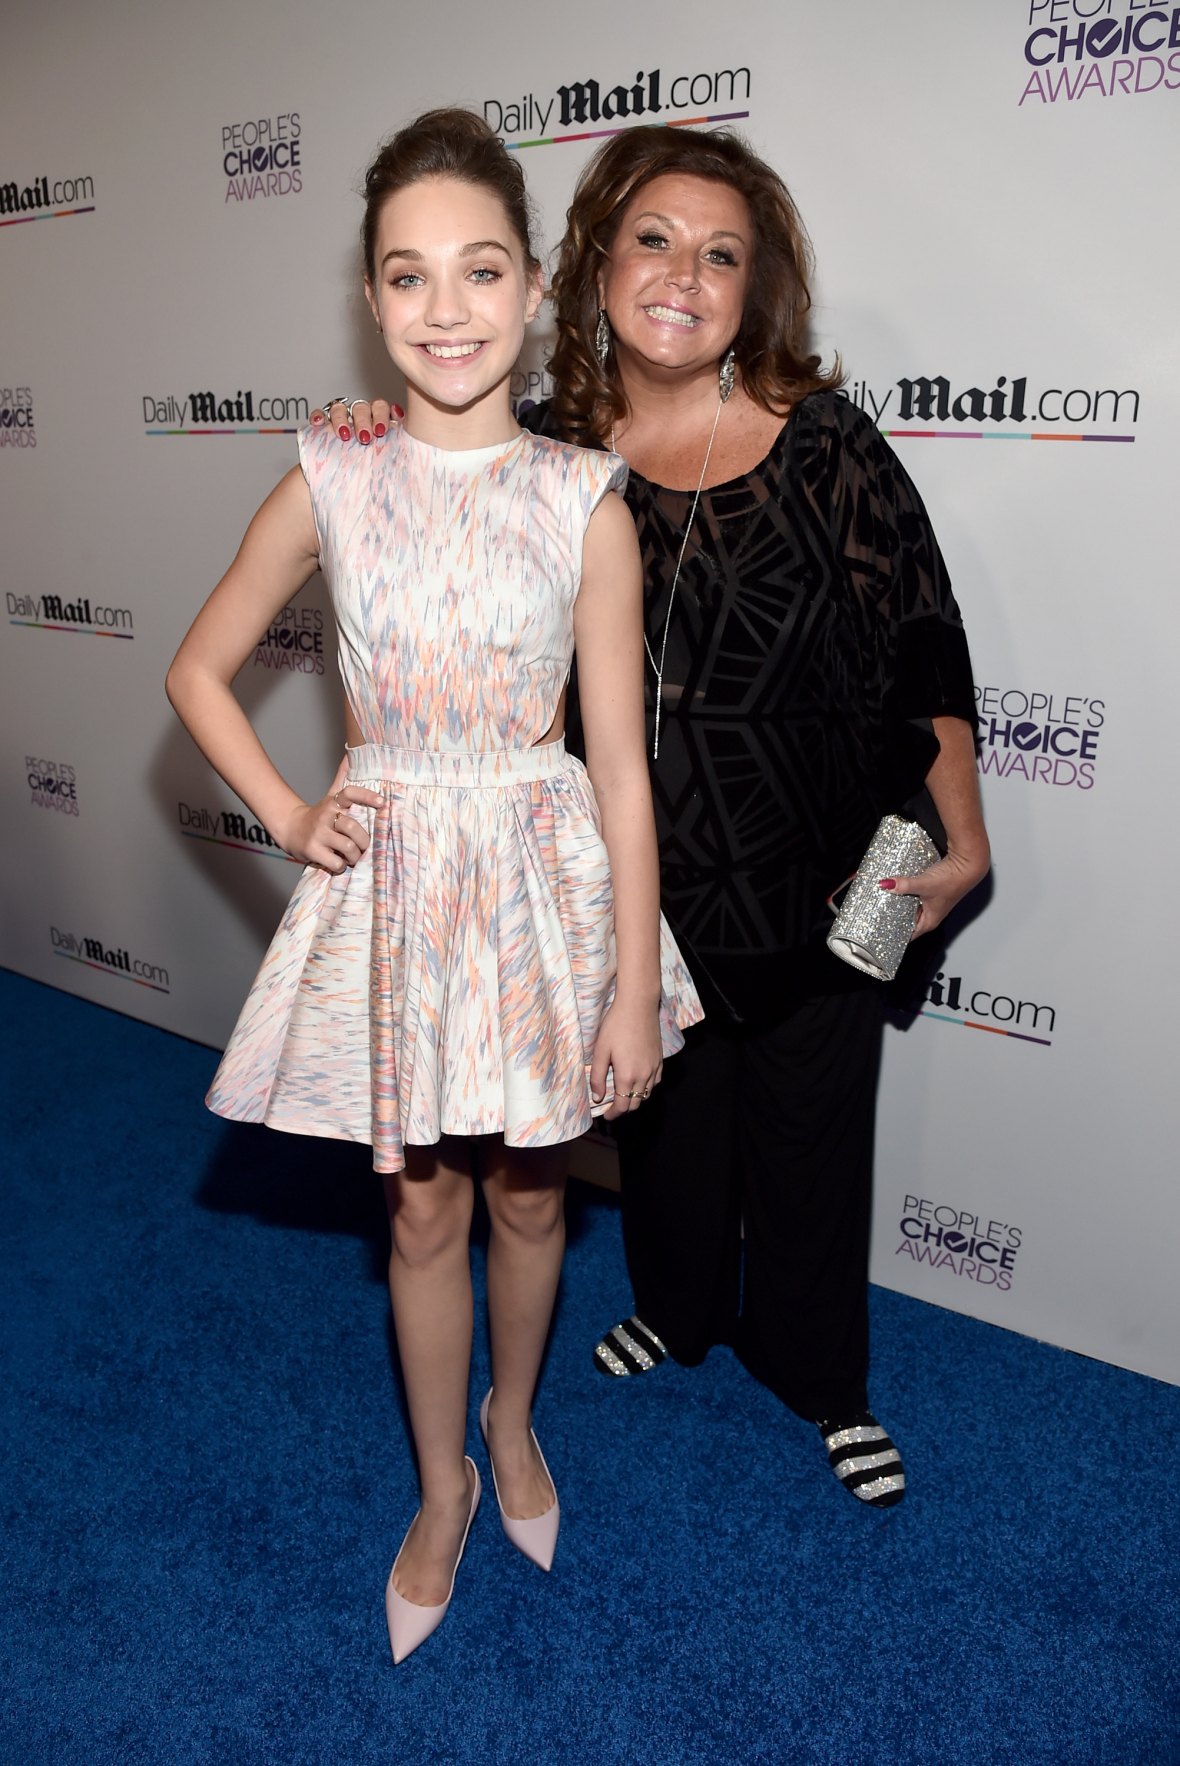 Does Abby Lee Miller Have a Daughter? Find Out!